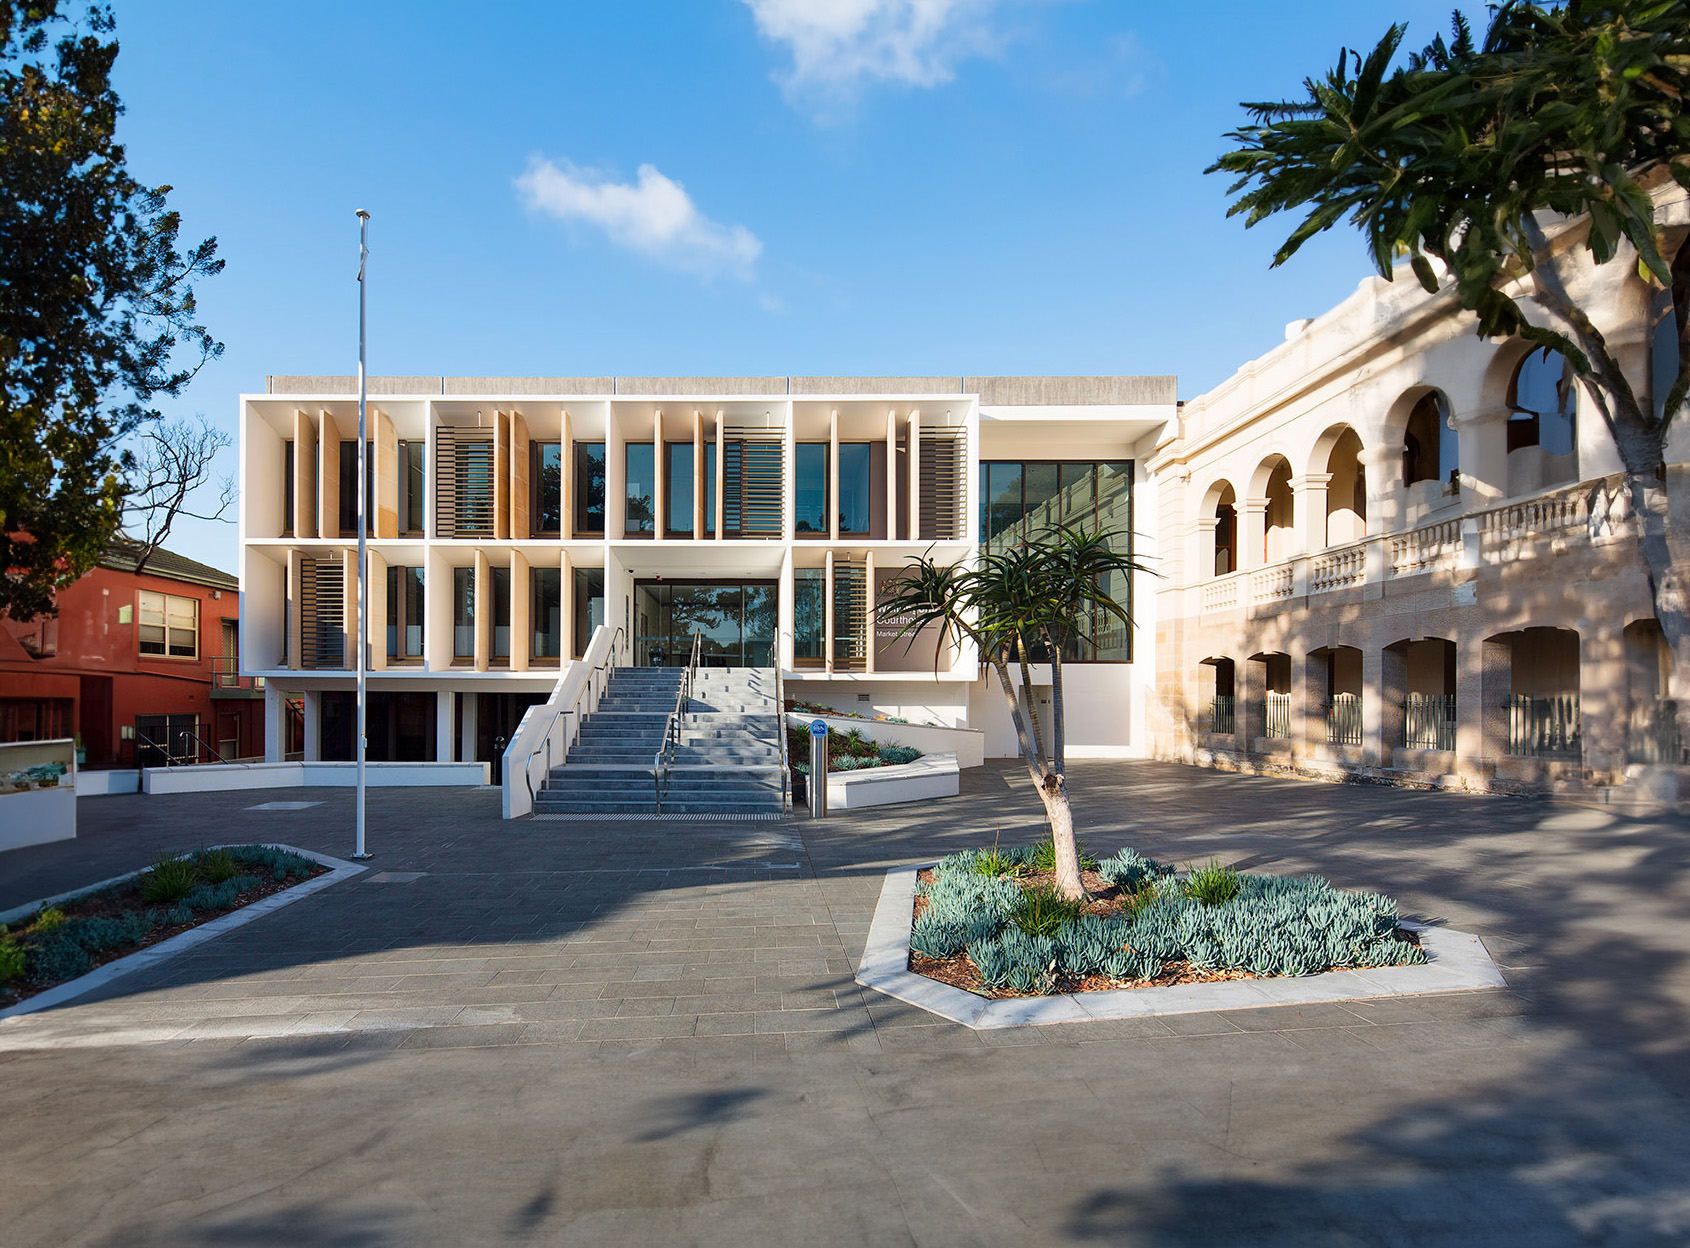 Wollongong Courthouse